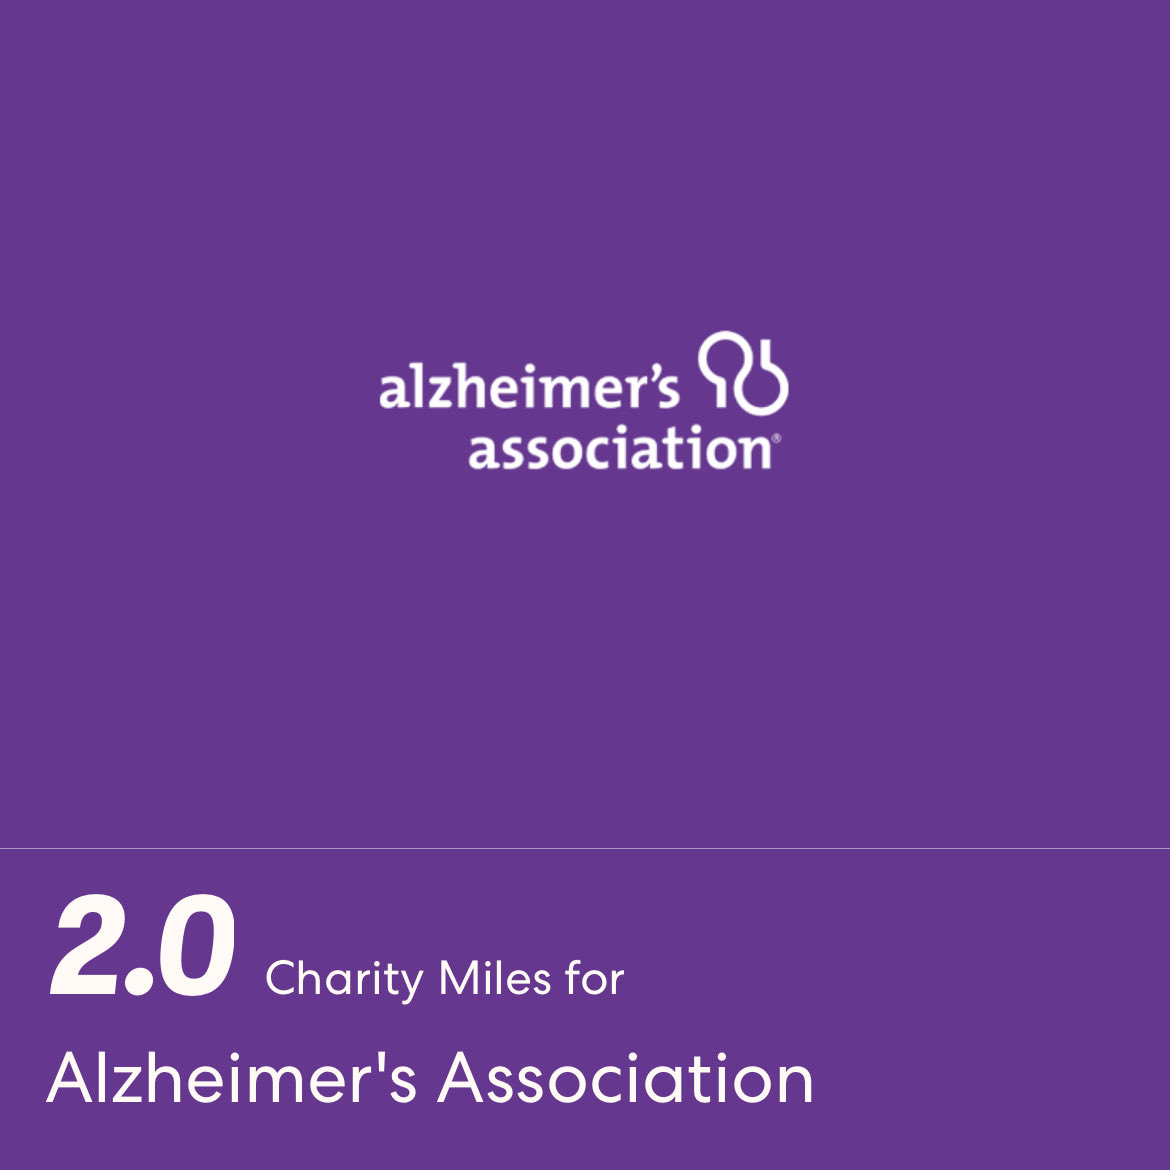 2.0 Charity Miles for Alzheimer's Association. I’d be grateful for your support. If you’re in a position to do so, please click here to sponsor me. miles.app.link/e/xyrYBy0U3tb